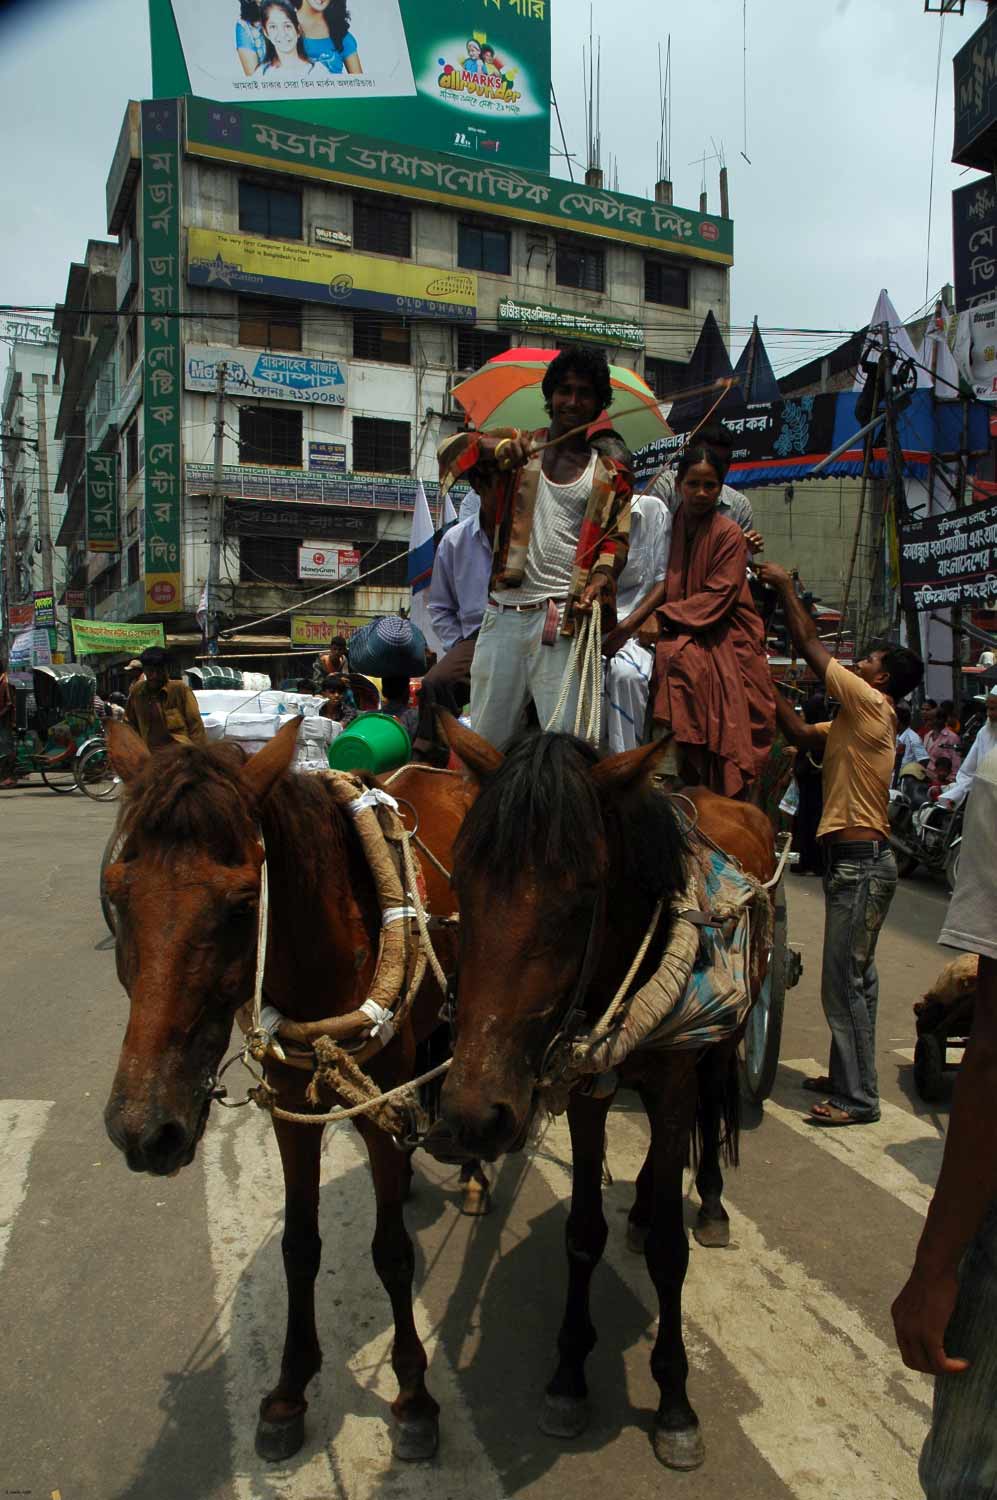 Horses pulling a carriage on a Dhaka street